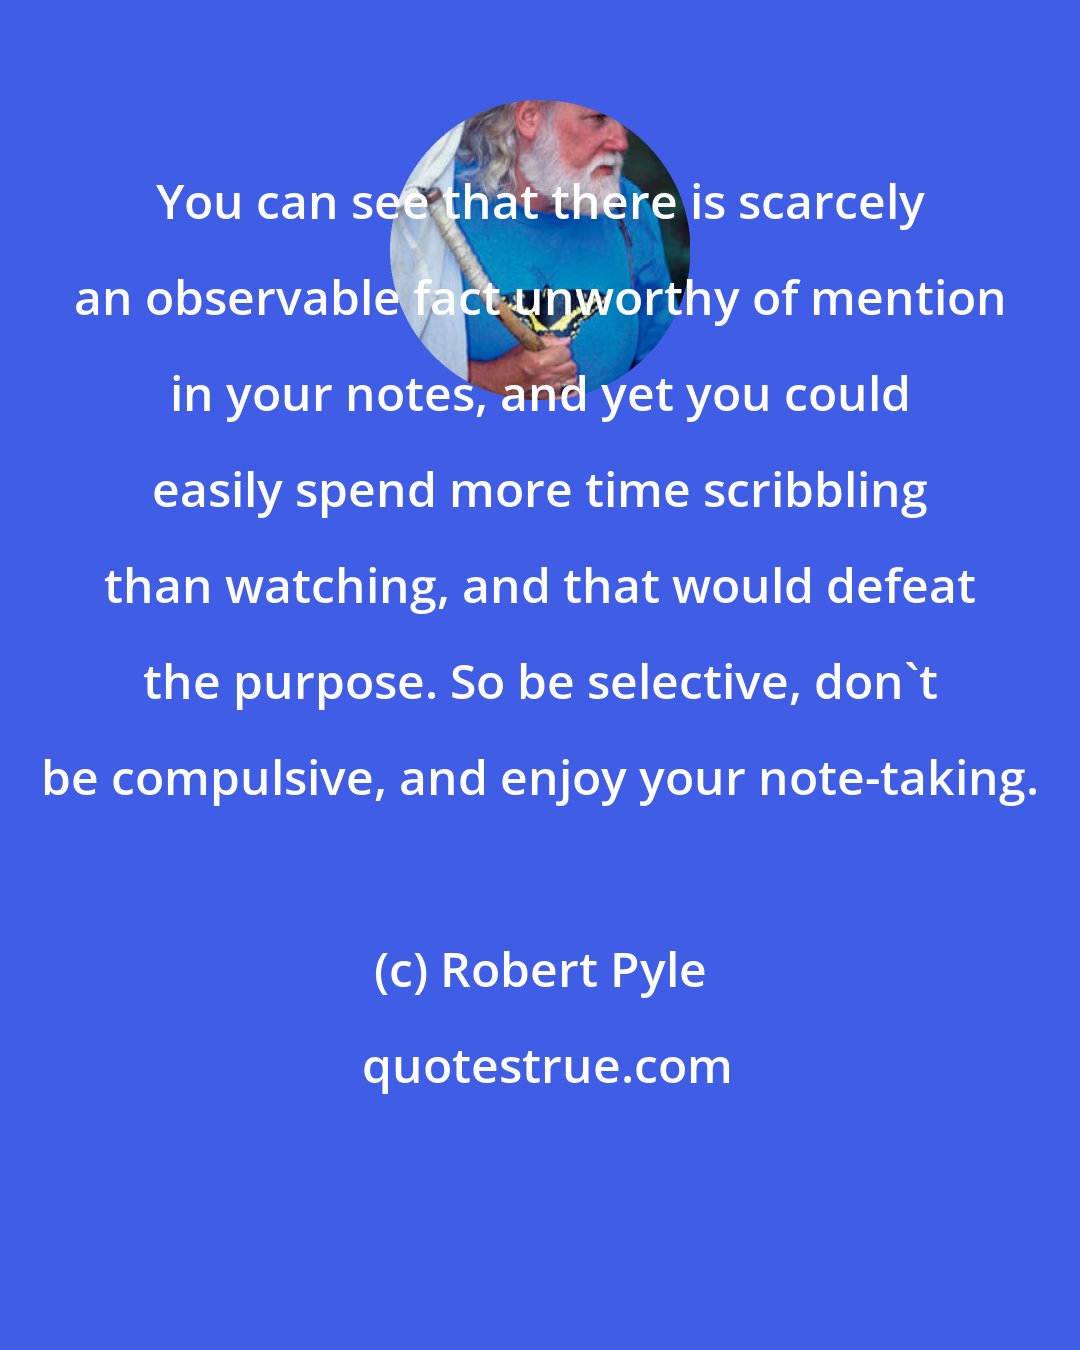 Robert Pyle: You can see that there is scarcely an observable fact unworthy of mention in your notes, and yet you could easily spend more time scribbling than watching, and that would defeat the purpose. So be selective, don't be compulsive, and enjoy your note-taking.